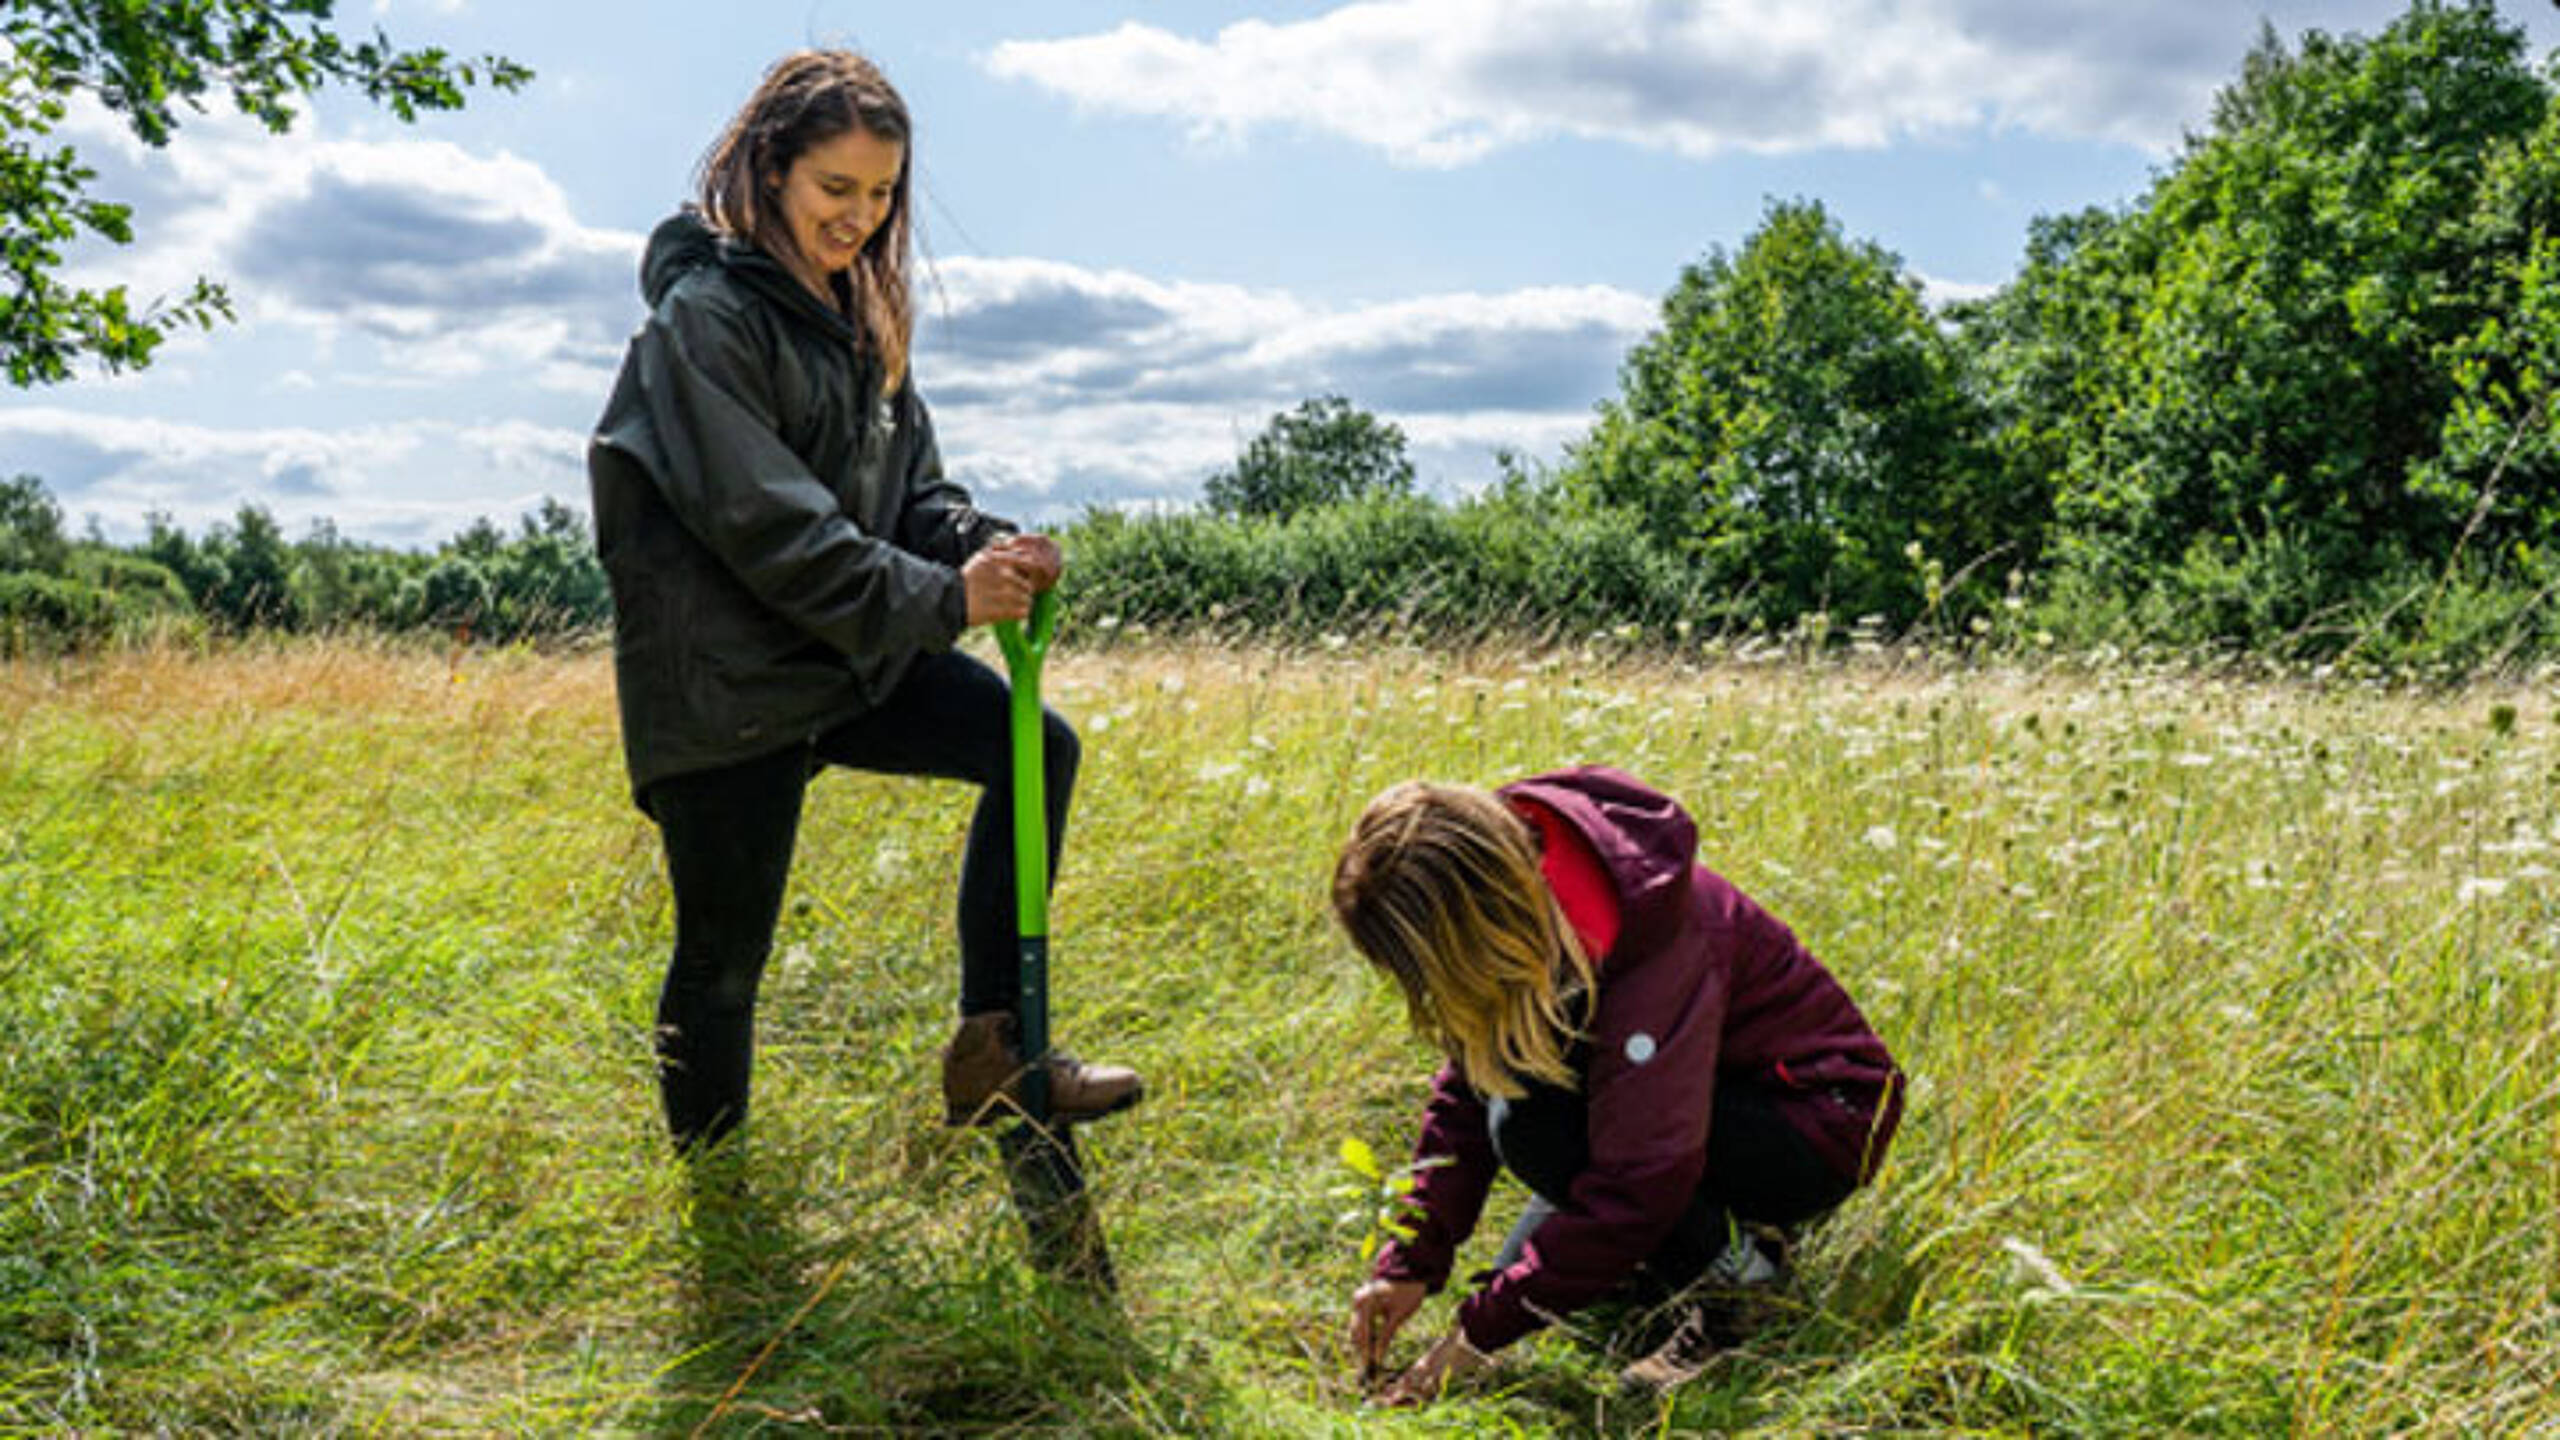 Two-thirds of Brits back ‘National Nature Service’ to get young people into green jobs